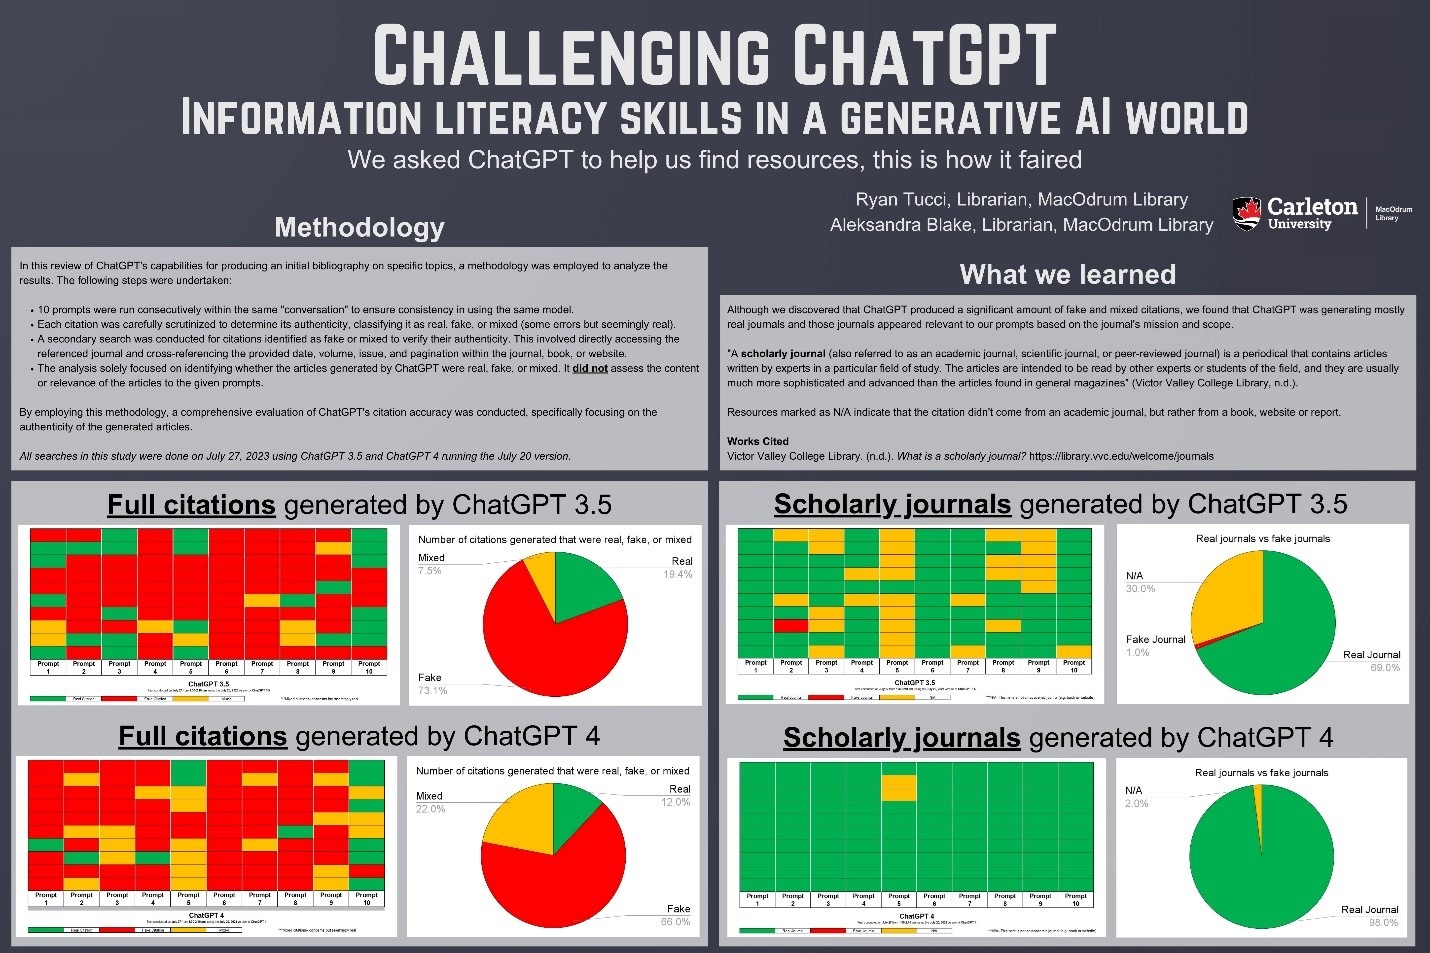 This is an informational poster titled 'Challenging ChatGPT Information Literacy Skills in a Generative AI World'. It presents a study conducted by Ryan Tucci and Aleksandra Blake, librarians at MacOdrum Library, Carleton University. The poster outlines the accuracy of citations generated by ChatGPT. It compares full citations and scholarly journals generated by ChatGPT 3.5 and 4. The graphics depict the proportion of real, fake, and mixed citations, with a significant portion of fake citations identified. Additional information includes a definition of a scholarly journal and a note about the searches being done on July 27, 2023 (Generated by ChatGPT 4).